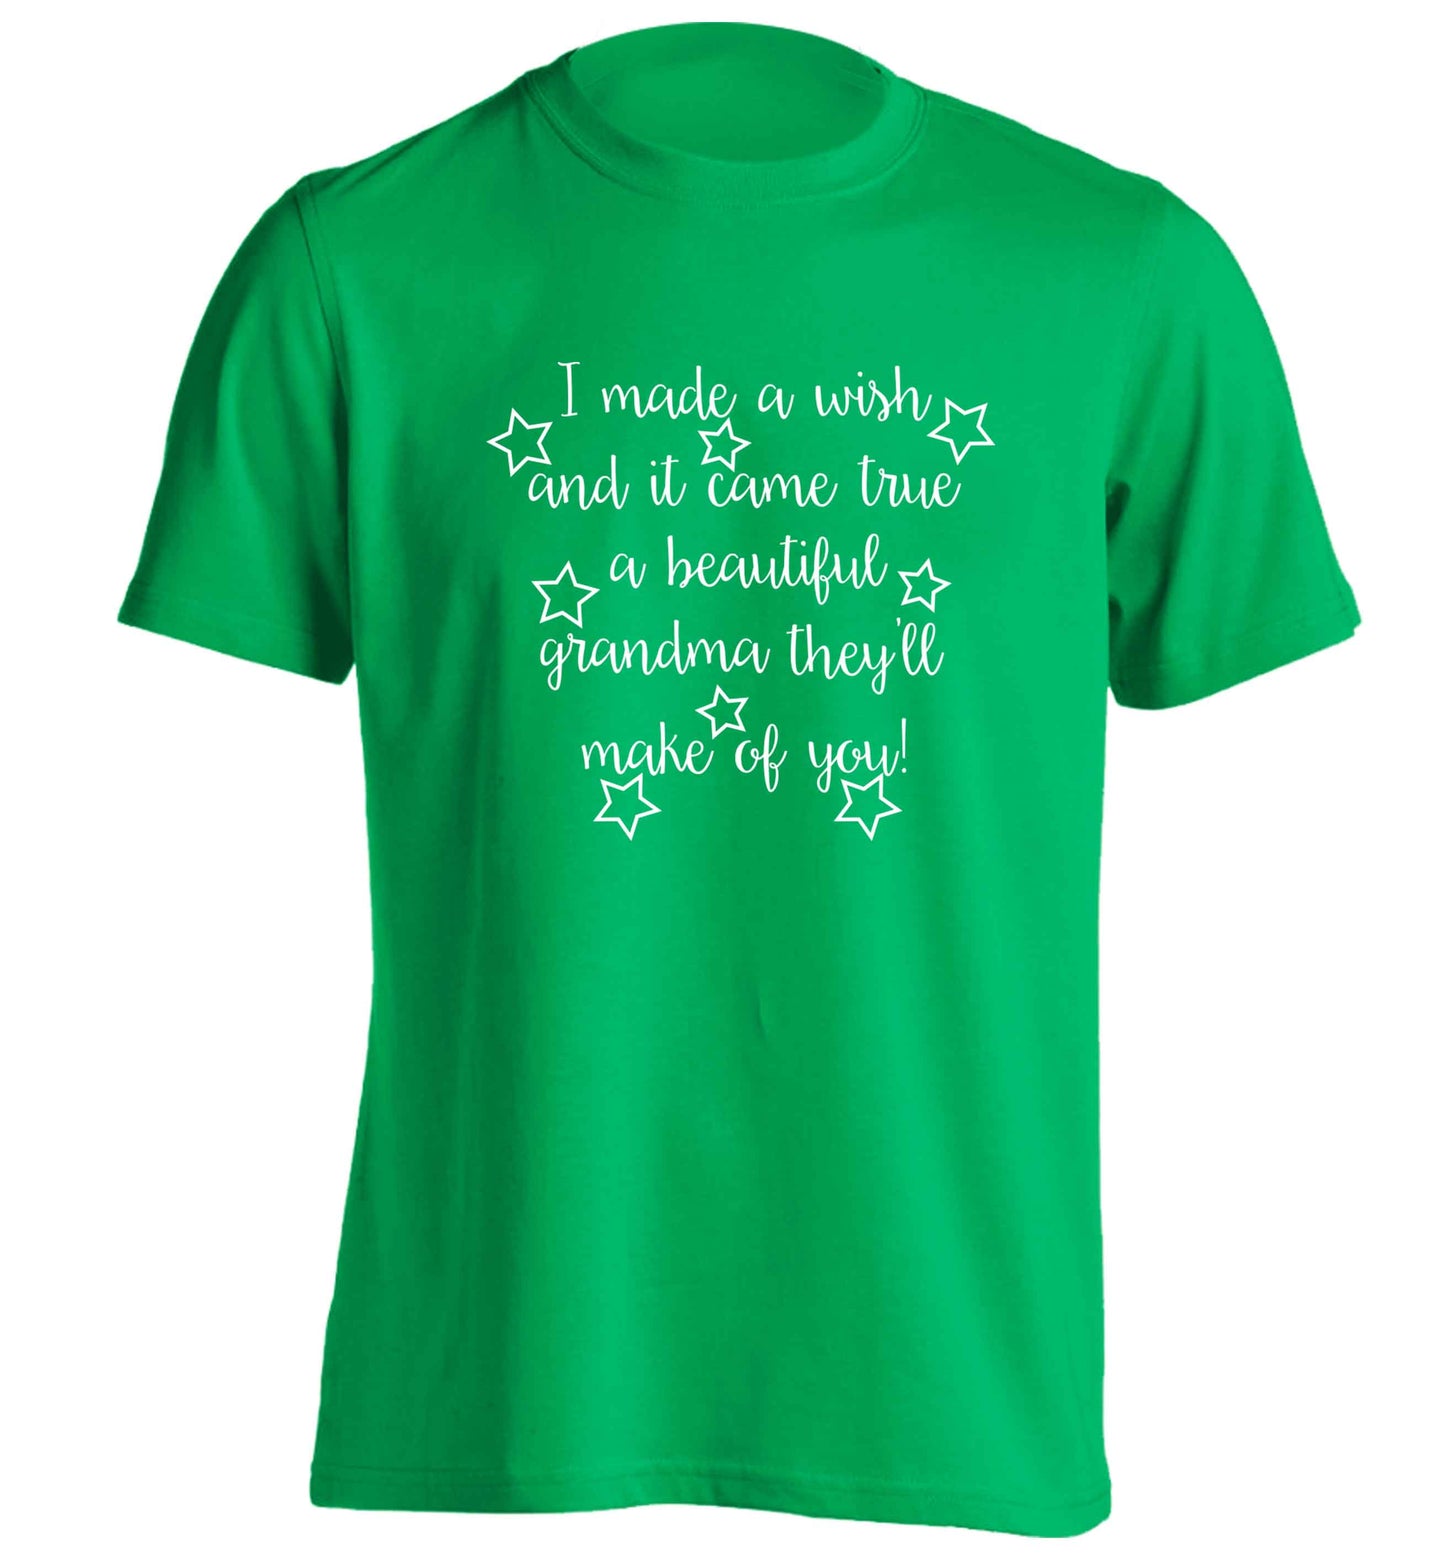 I made a wish and it came true a beautiful grandma they'll make of you! adults unisex green Tshirt 2XL